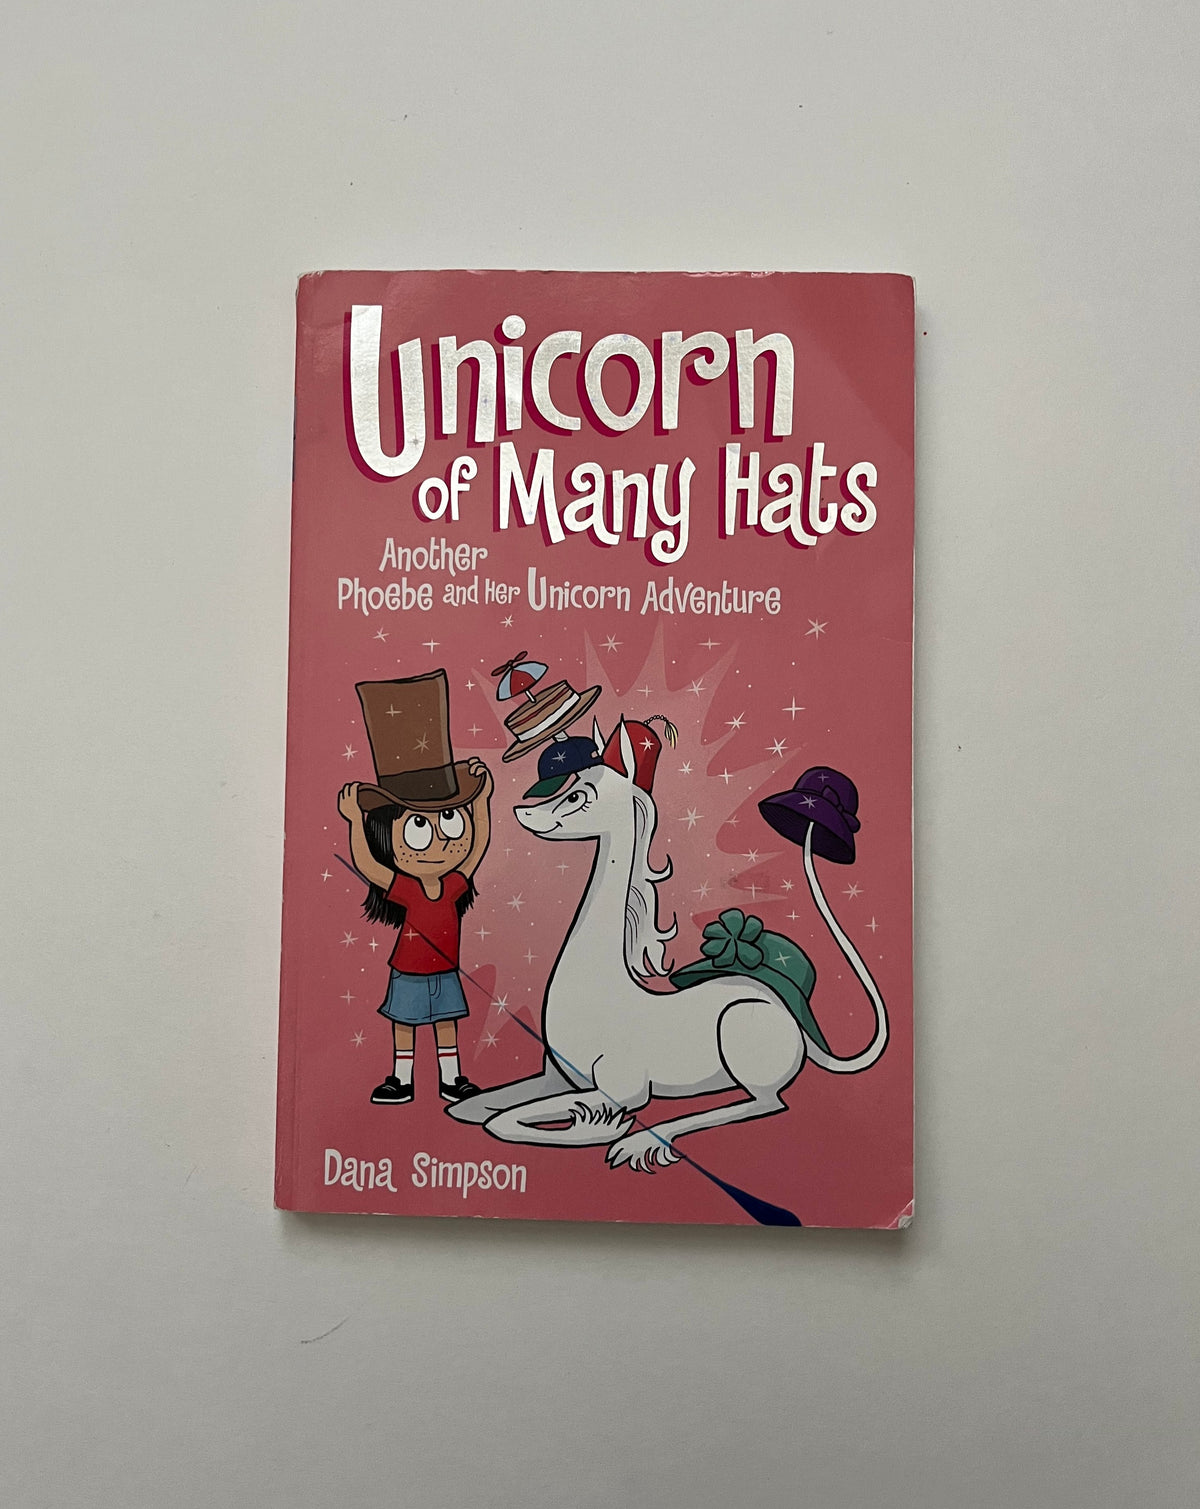 Unicorn of Many Hats: Another Phoebe and her Unicorn Adventure by Dana Simpson